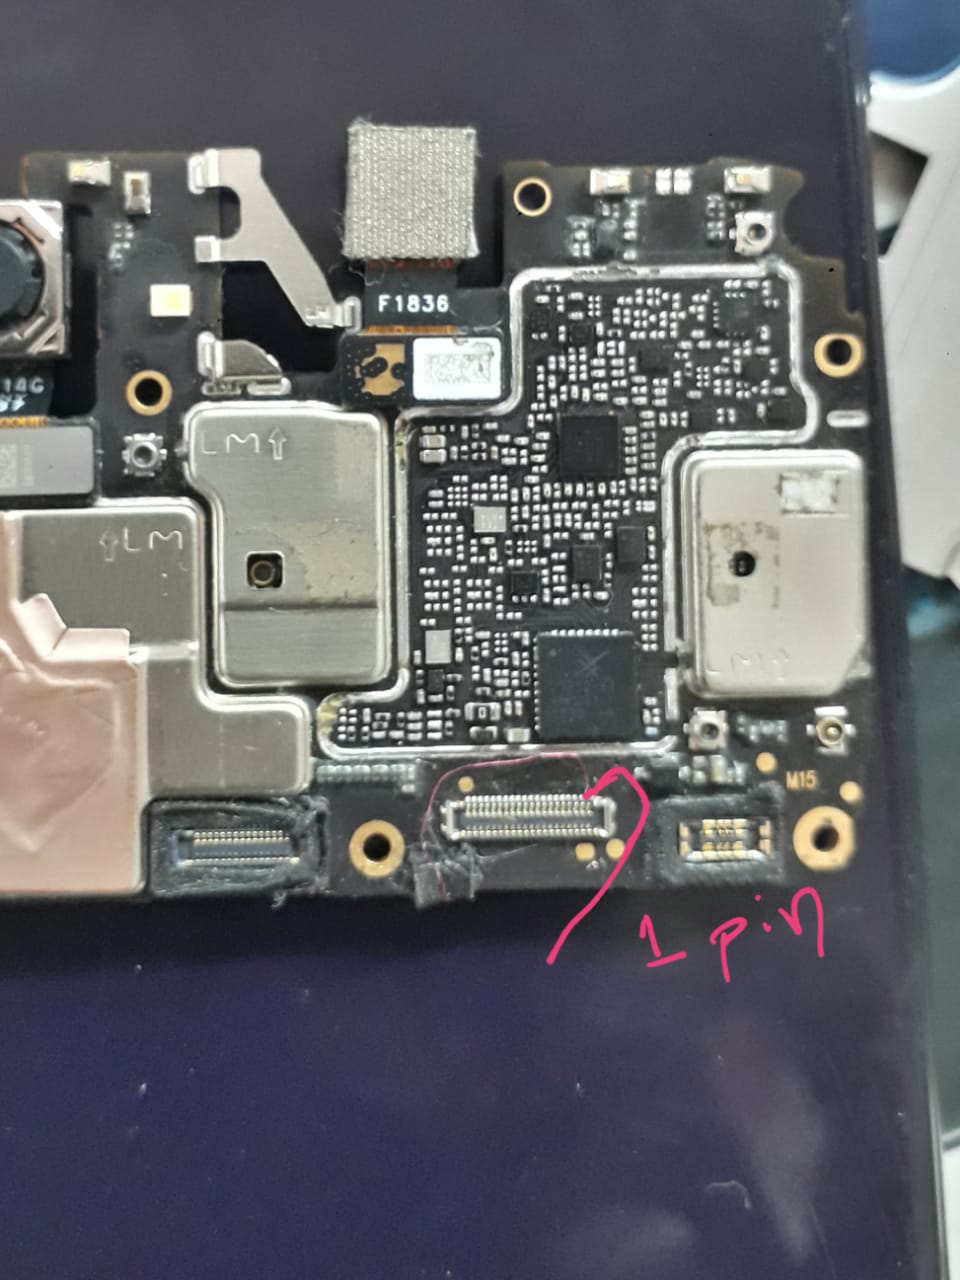 Oppo A3s Cph1853 Isp Pinout For Flashing Remove Pattern And Frp